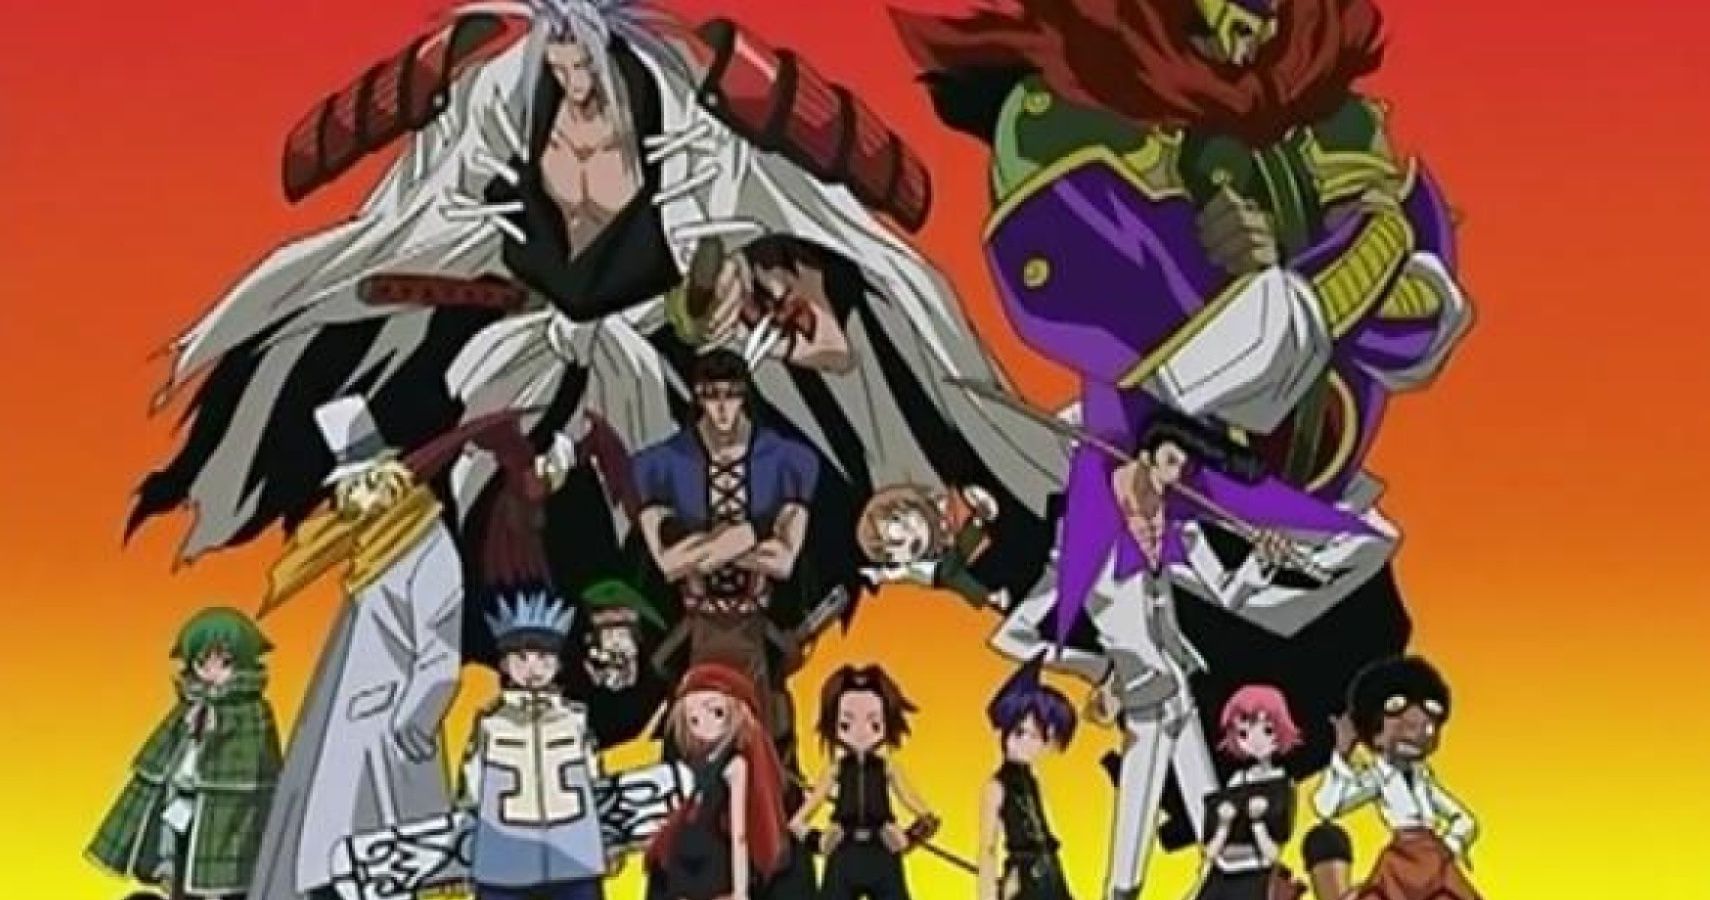 Shaman King 5 Major Differences The Original Anime Had With The Manga And 5 Important Things It 